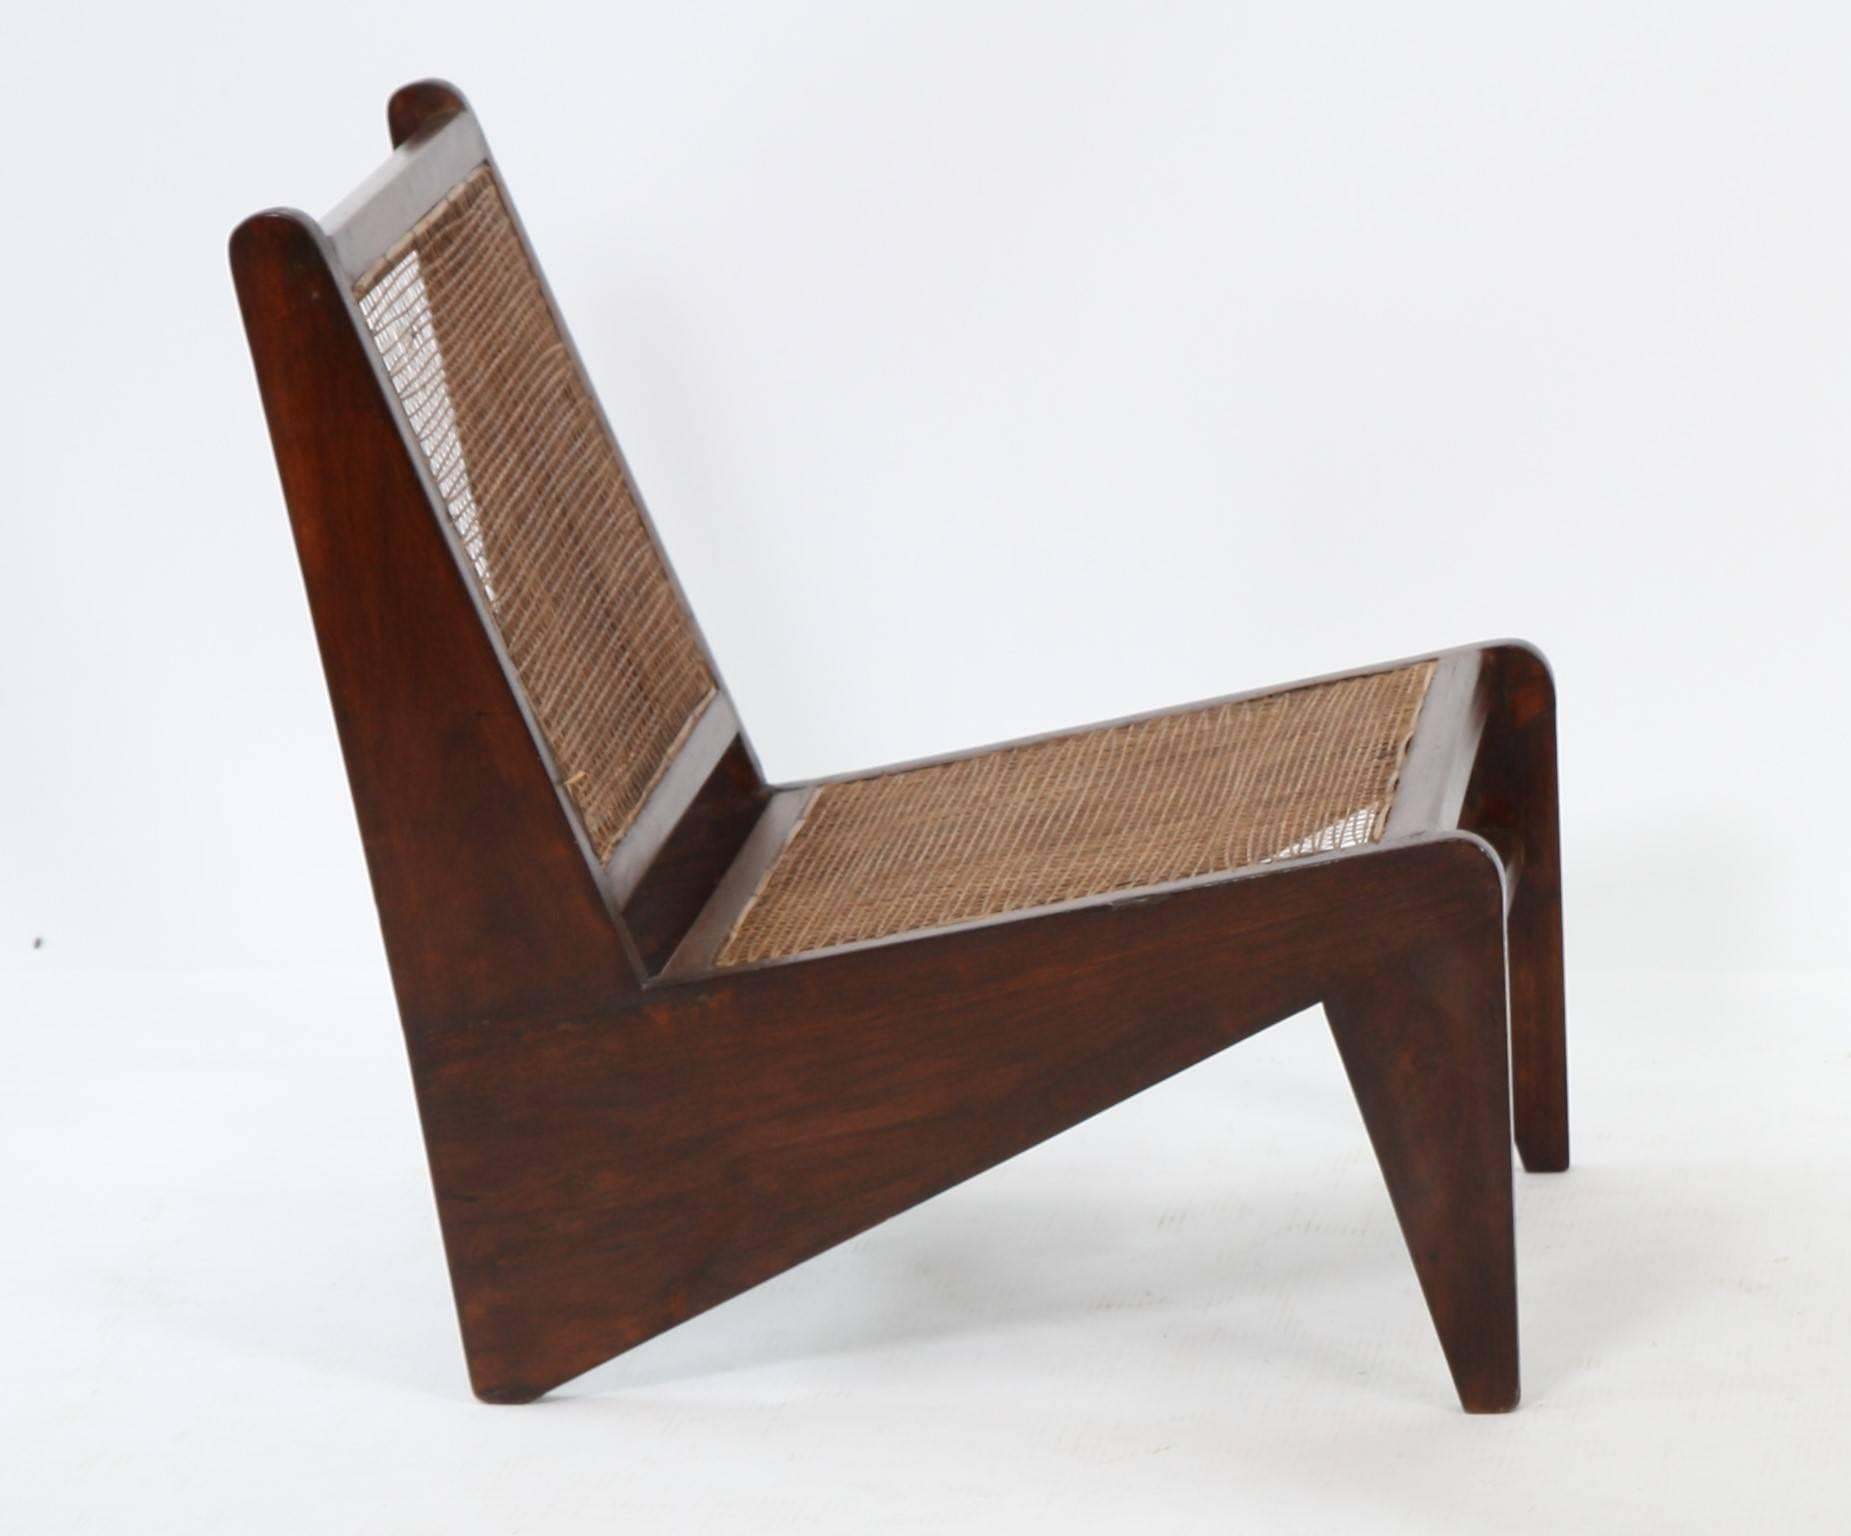 Pierre Jeanneret (1896-1967).
Rare and exceptional low seat called "kangaroo" solid sisso
(Indian rosewood). Seat and backrest caned.
Two oblique feet and profiles on the front.
The slightly curved backrest.
Restoration of